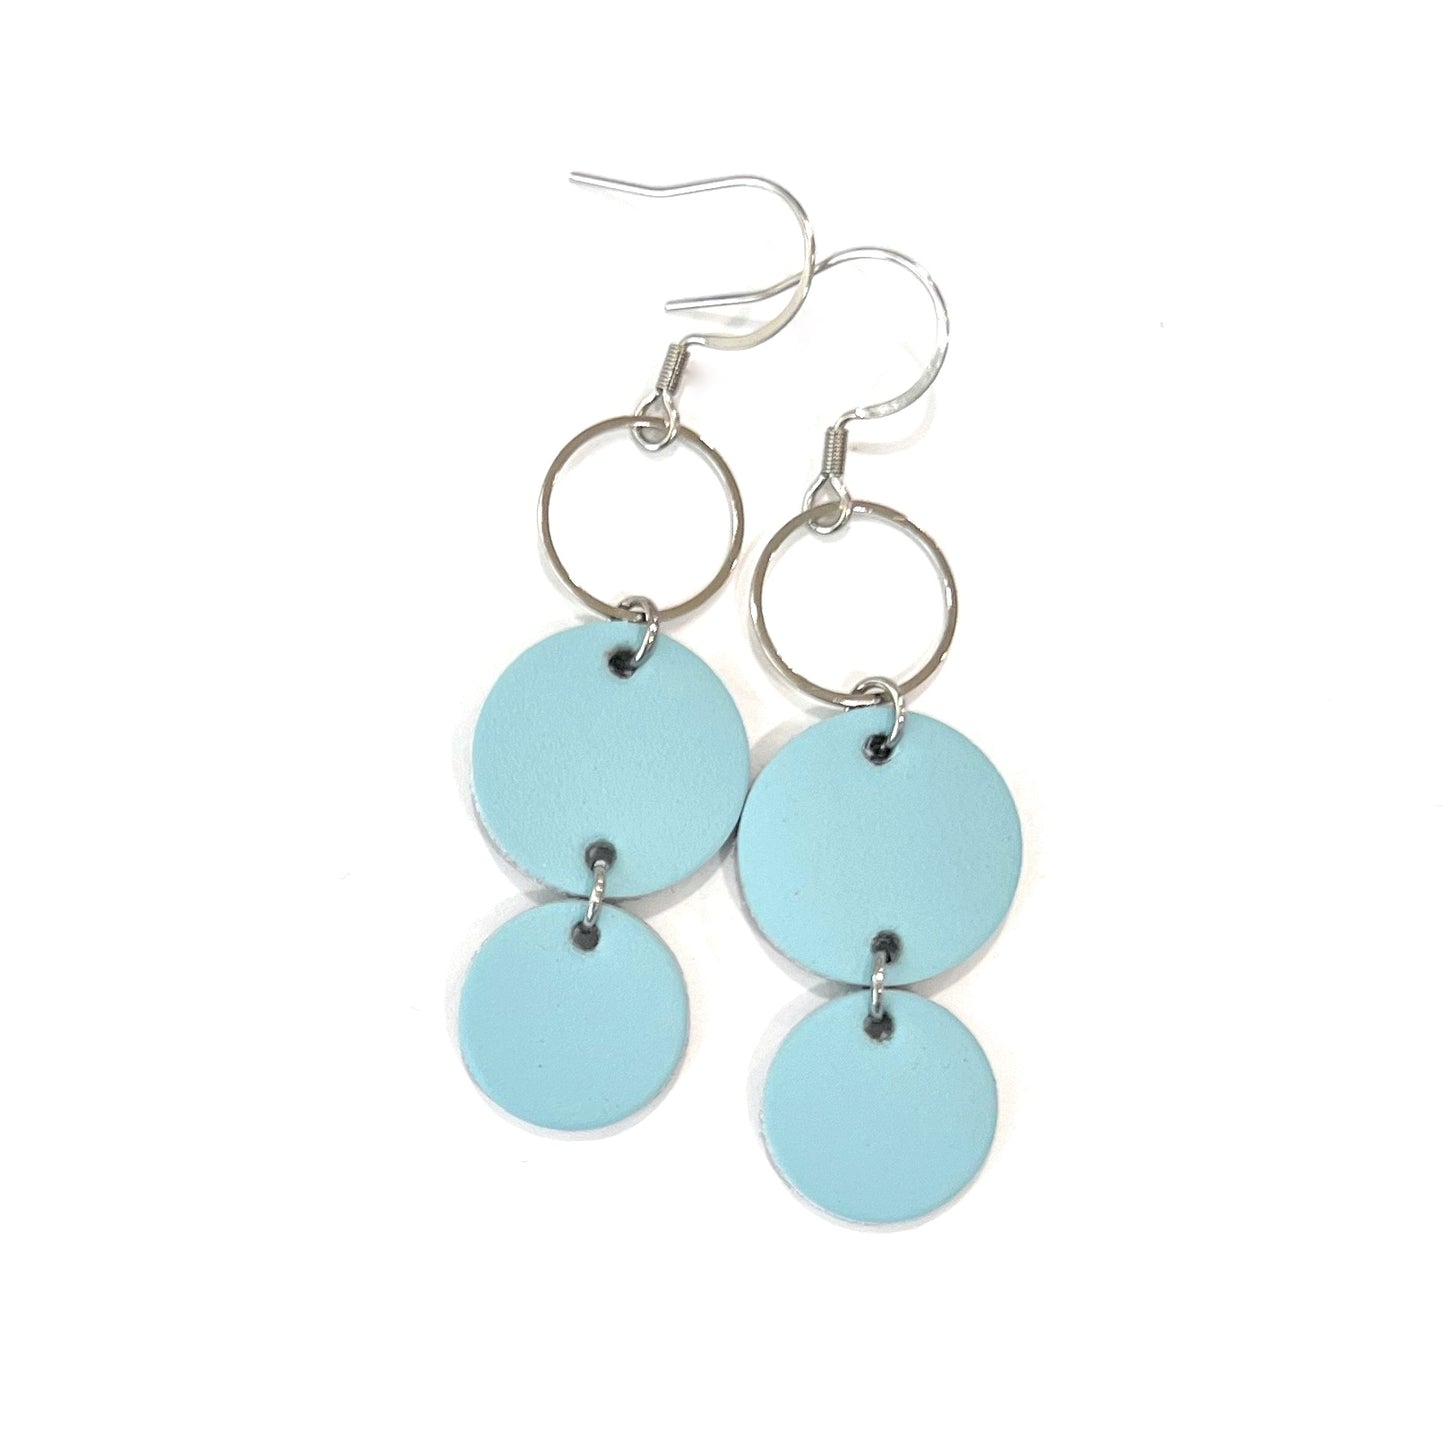 THE DOTTY DANGLE in Baby Blue